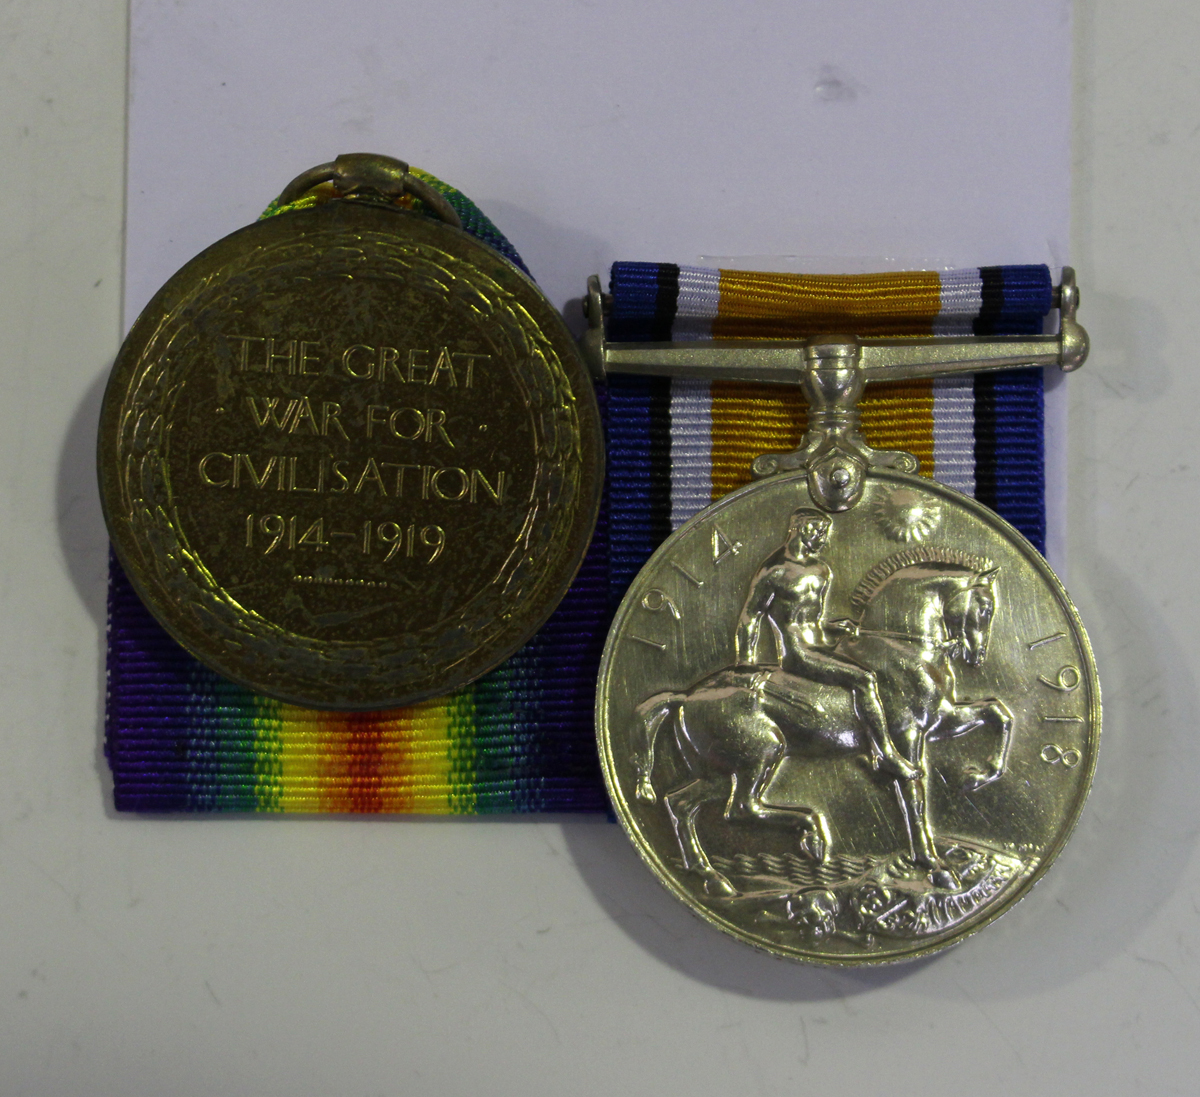 A 1914-18 British War Medal and a 1914-19 Victory Medal to '47232 Pte. G.E.Gumbrell. W.York.R.' - Image 2 of 4